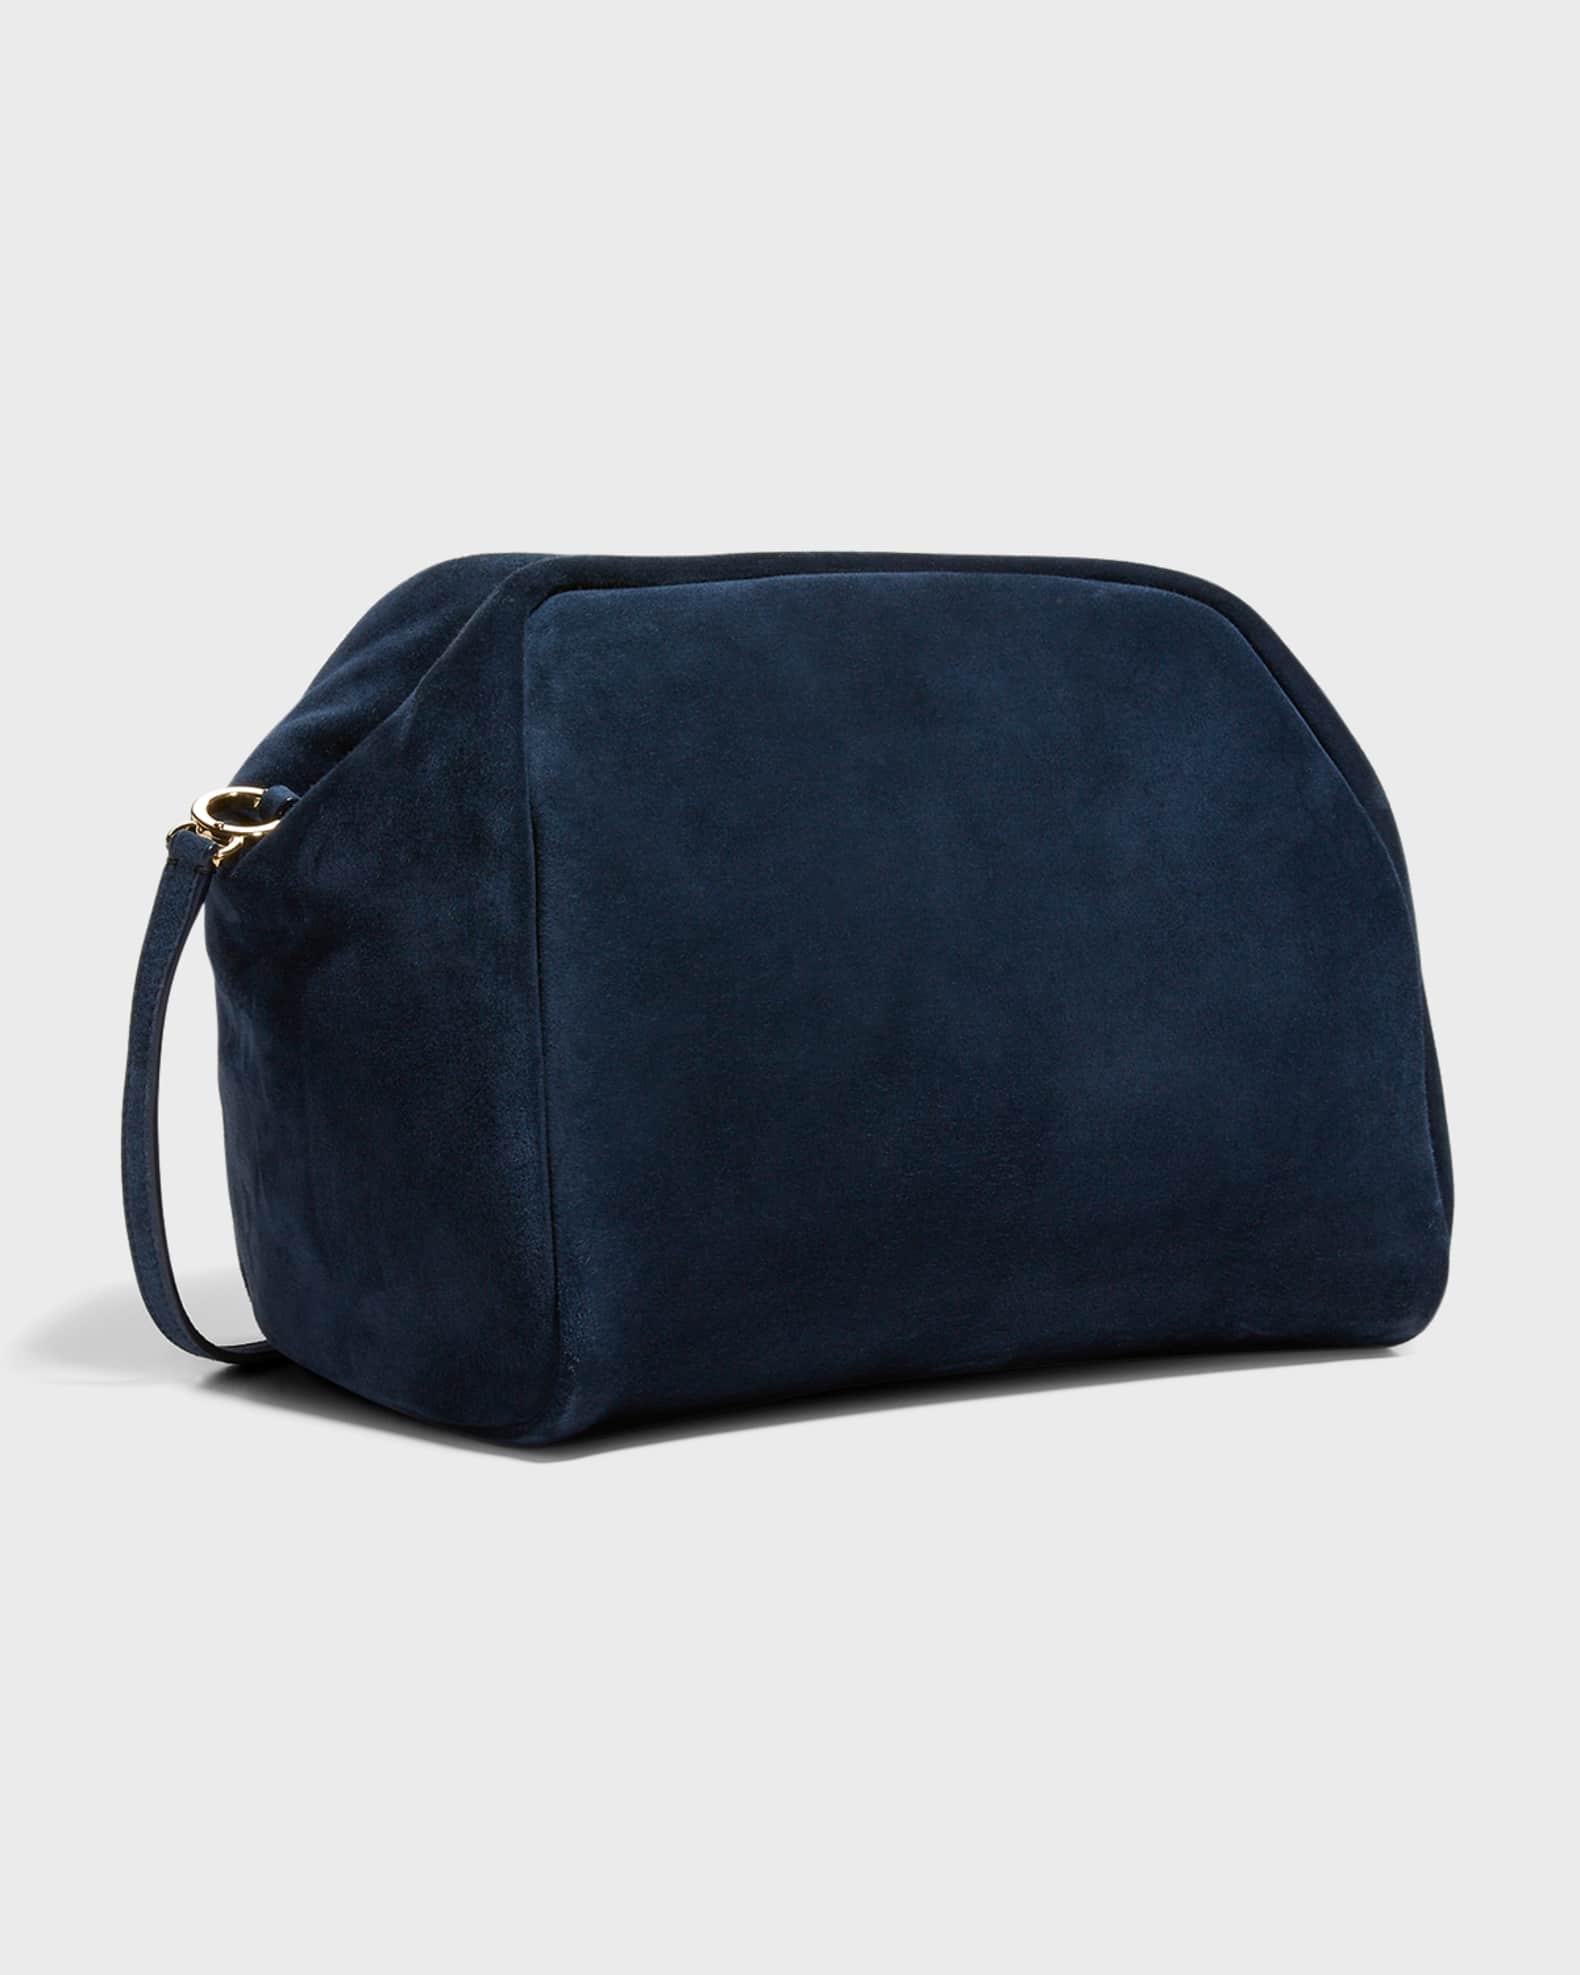 Loro Piana Pad Cashmere-Suede Pouch Clutch Bag Navy Blue